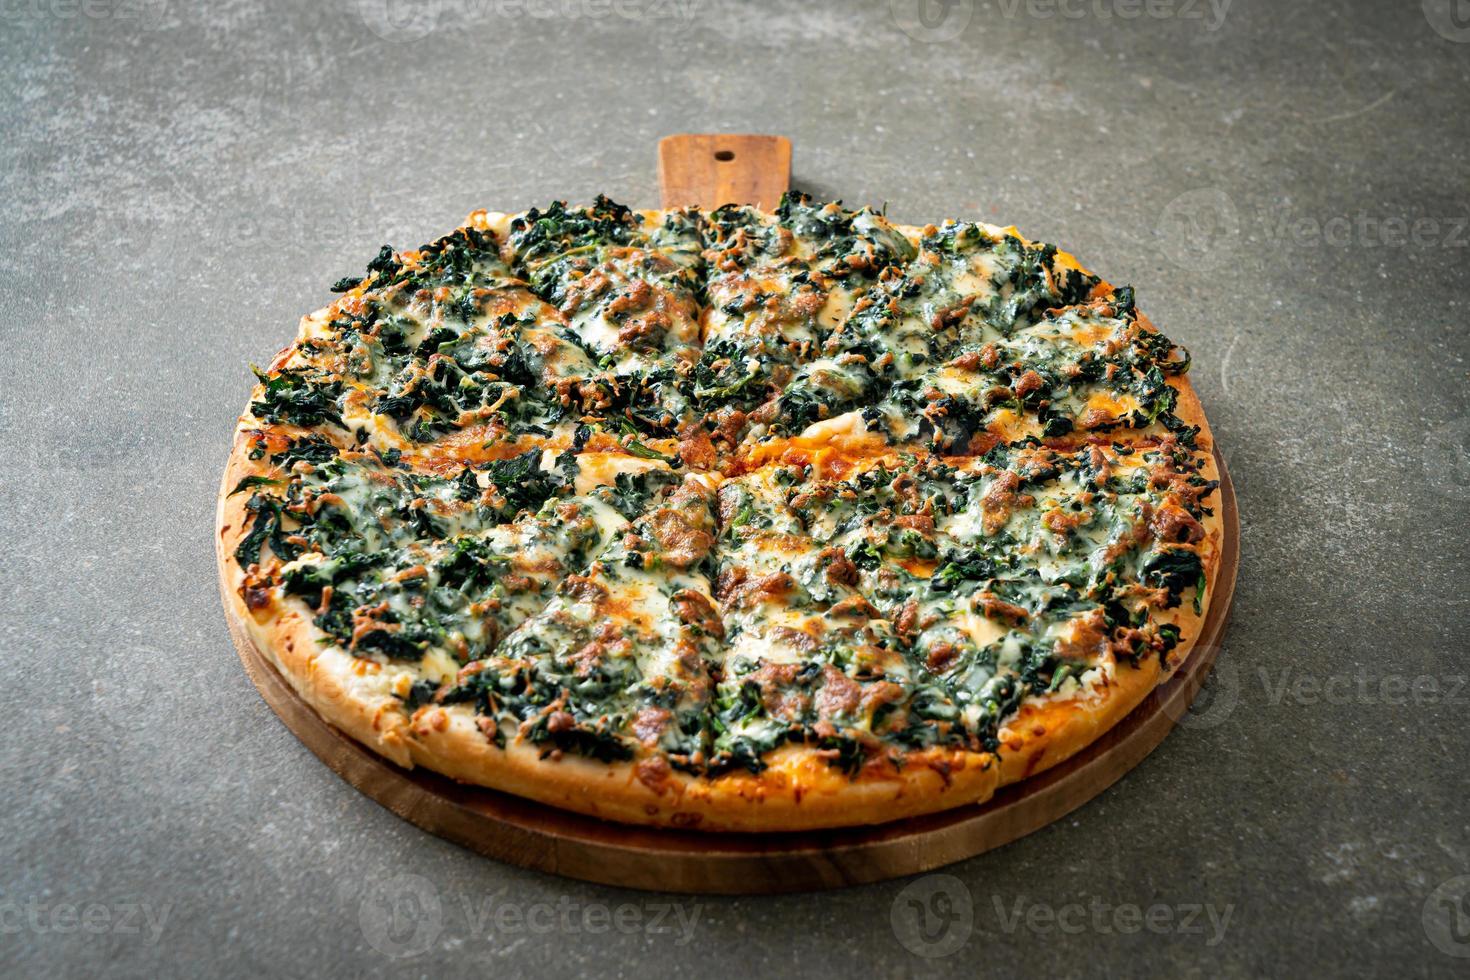 Spinach and cheese pizza on wood tray photo